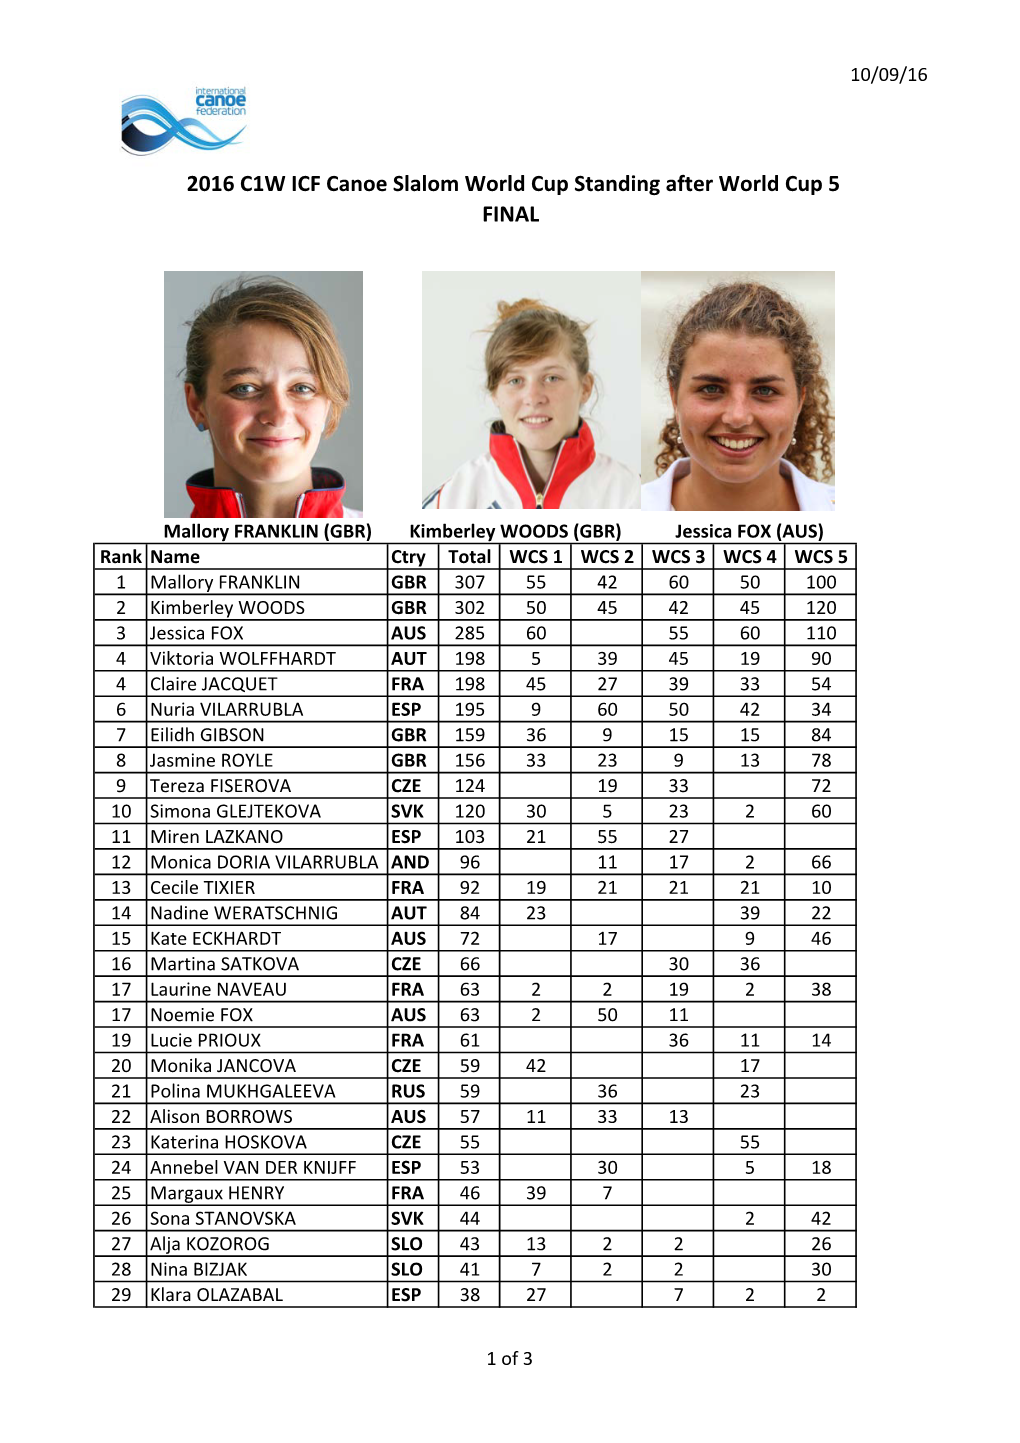 2016 C1W ICF Canoe Slalom World Cup Standing After World Cup 5 FINAL